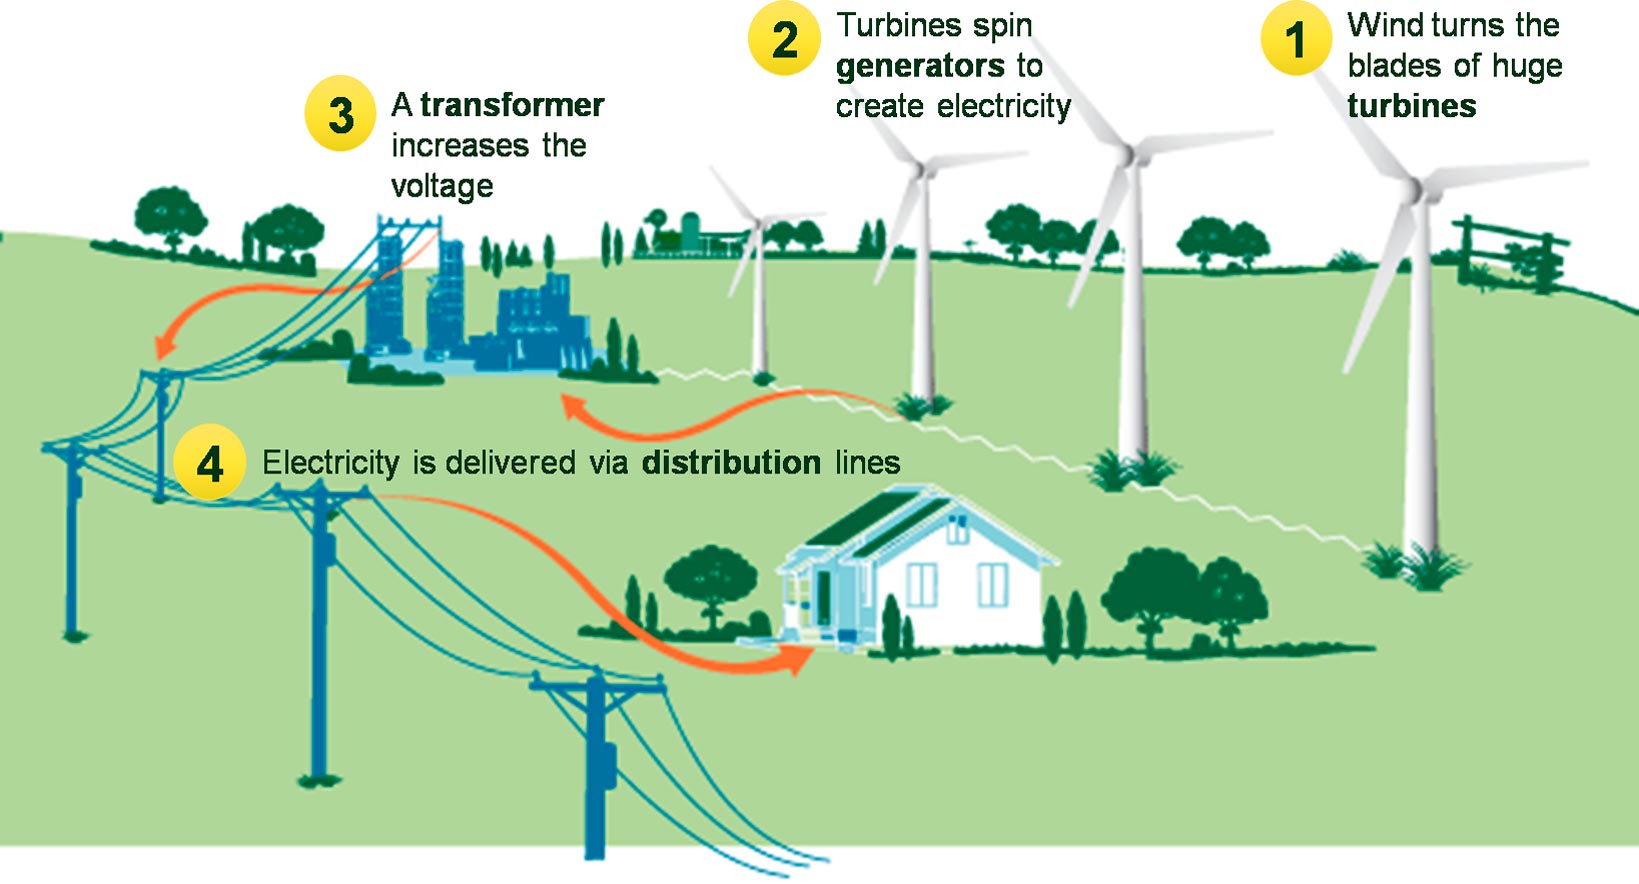 How many households can a wind turbine provide electricity? – SGK-Planet